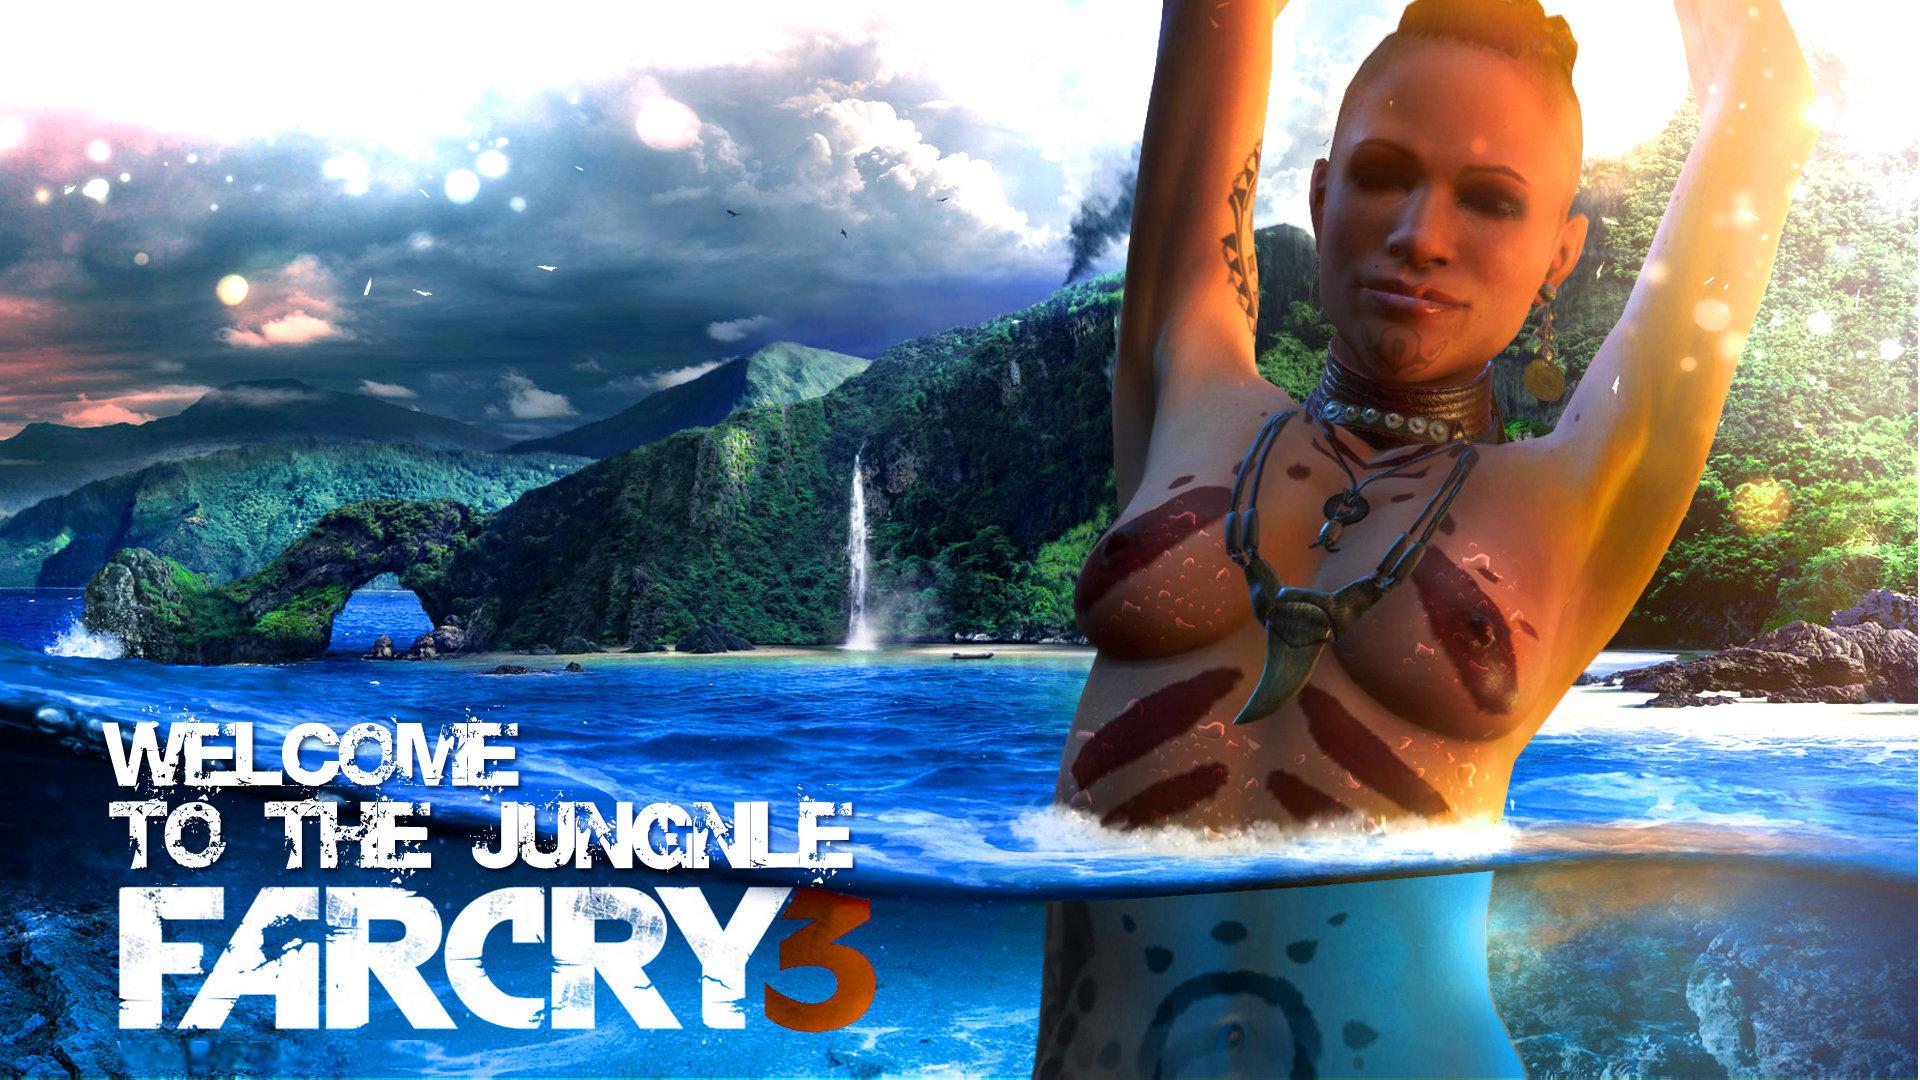 Far Cry 3 Wallpaper 1920×1080 Definition Wallpaper. Daily